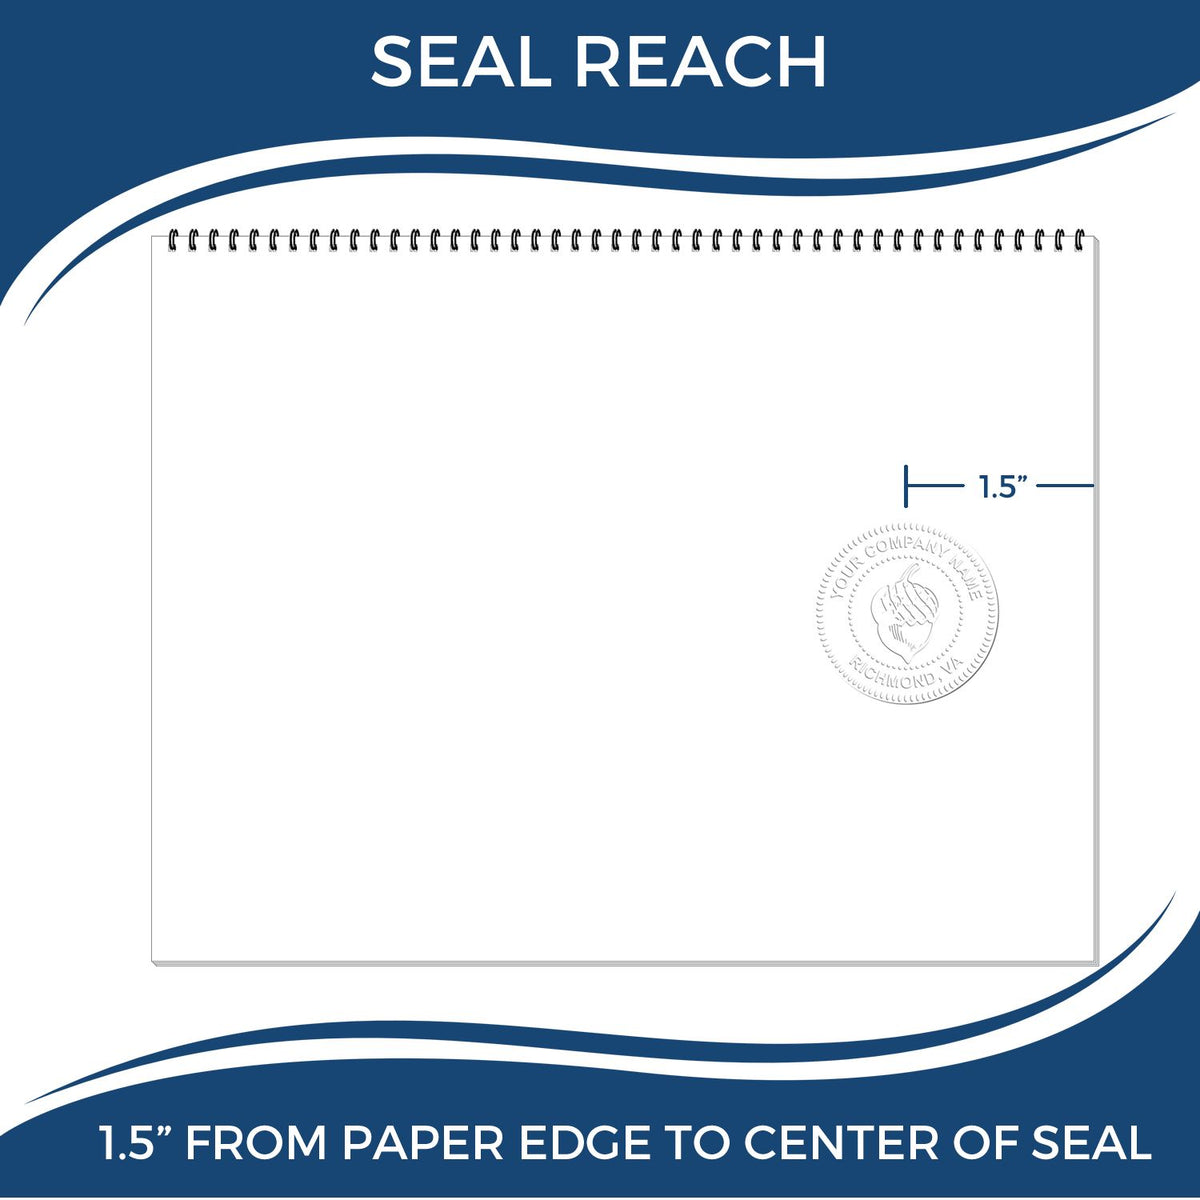 An infographic showing the seal reach which is represented by a ruler and a miniature seal image of the Hybrid Indiana Engineer Seal